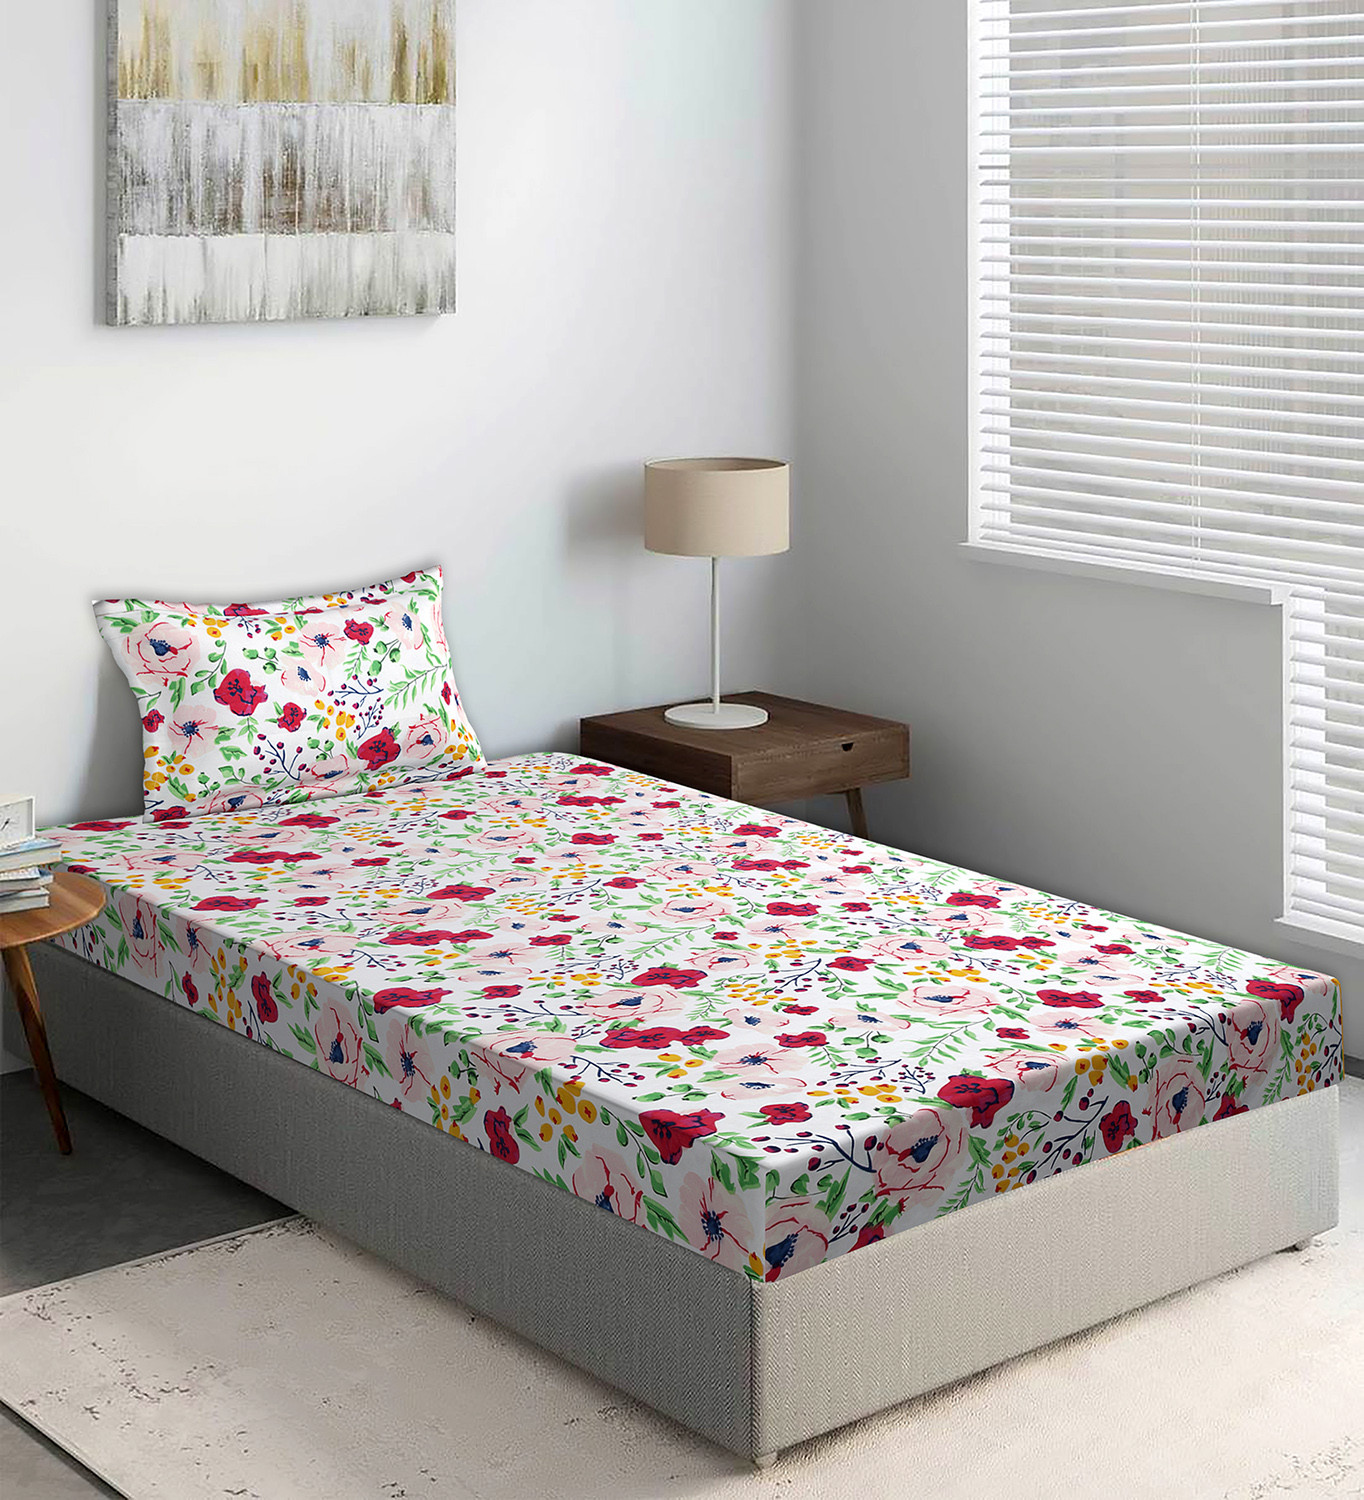 Kuber Industries Glance Cotton Red & White Flower Print Single Bedsheet With 1 Pillow Cover,90x60 ,(Multicolor)